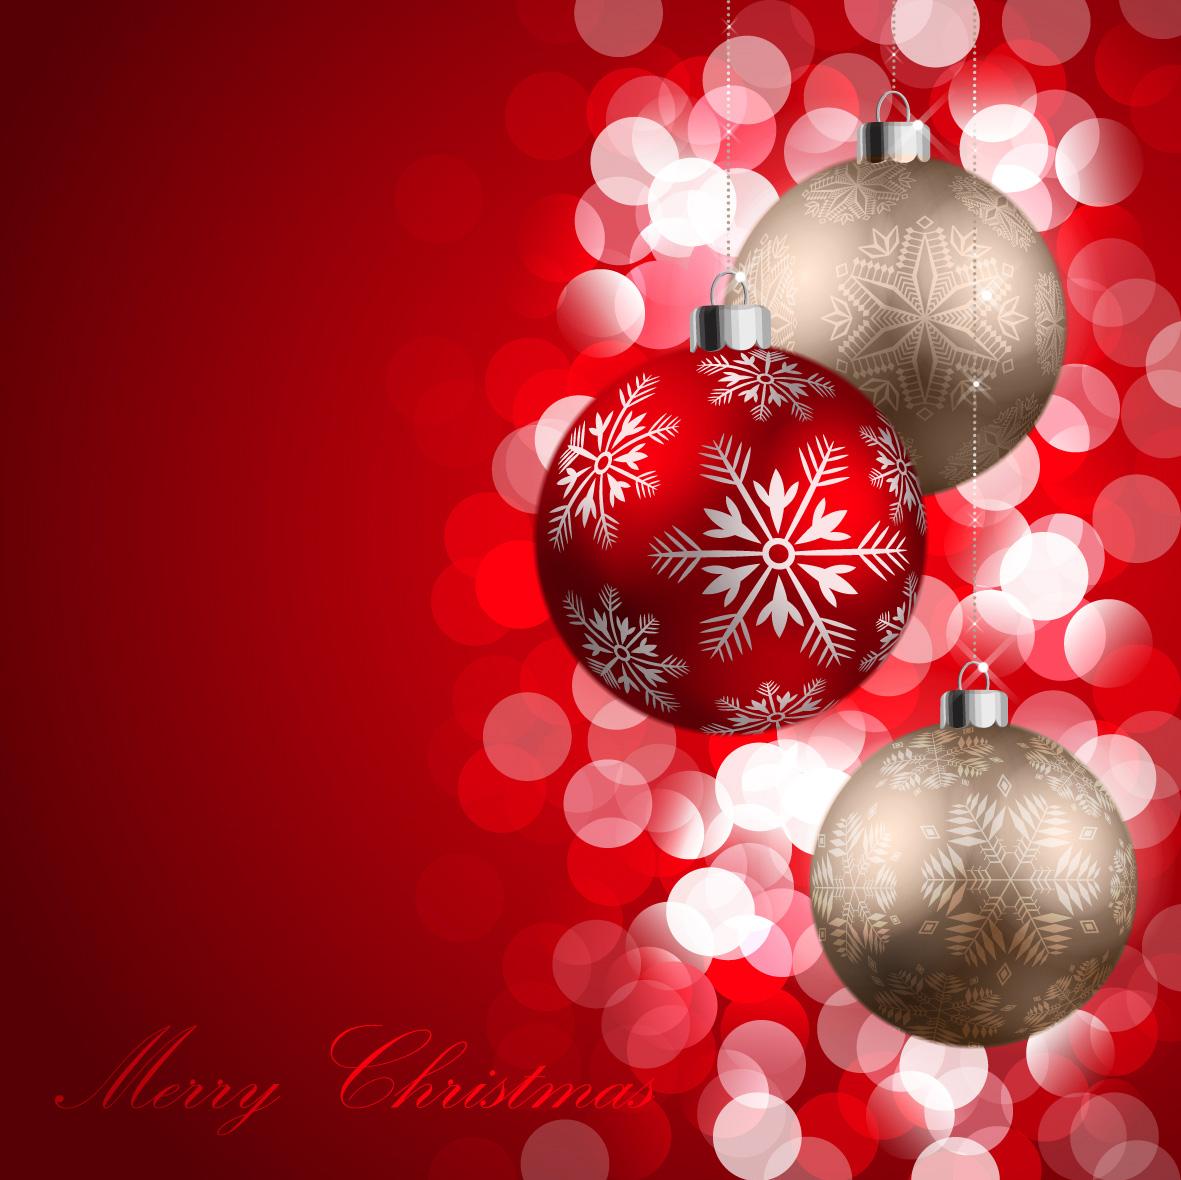 Merry Christmas Red Background With Ornaments Gallery